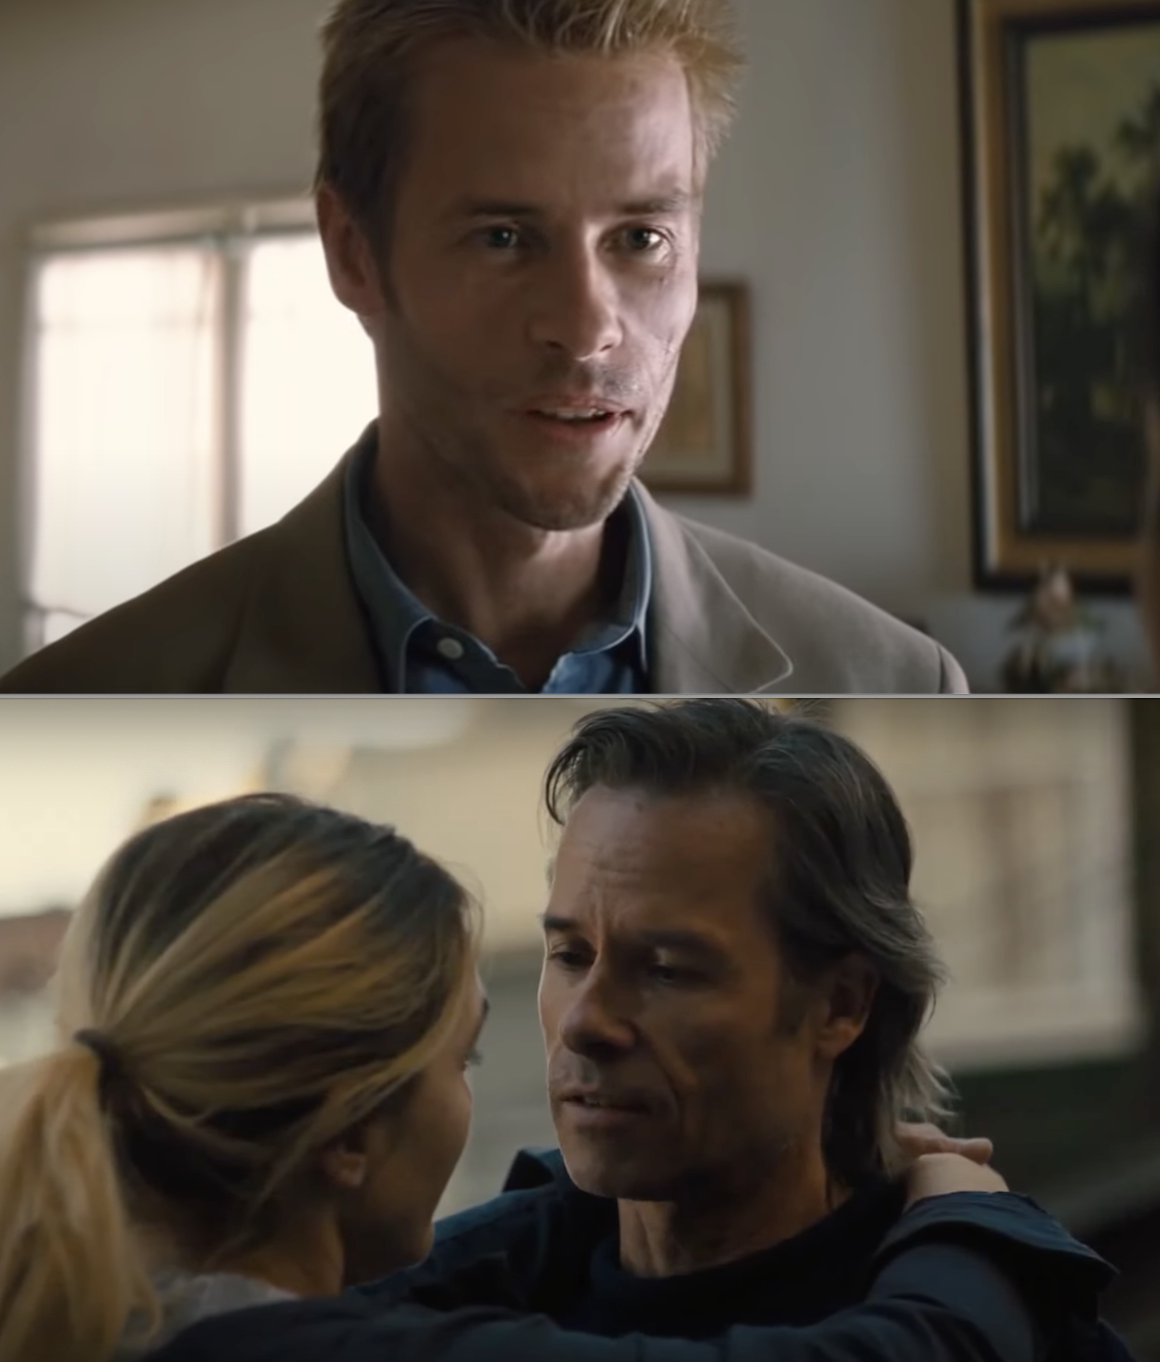 Guy in &quot;Memento&quot; and &quot;Mare of Easttown&quot;